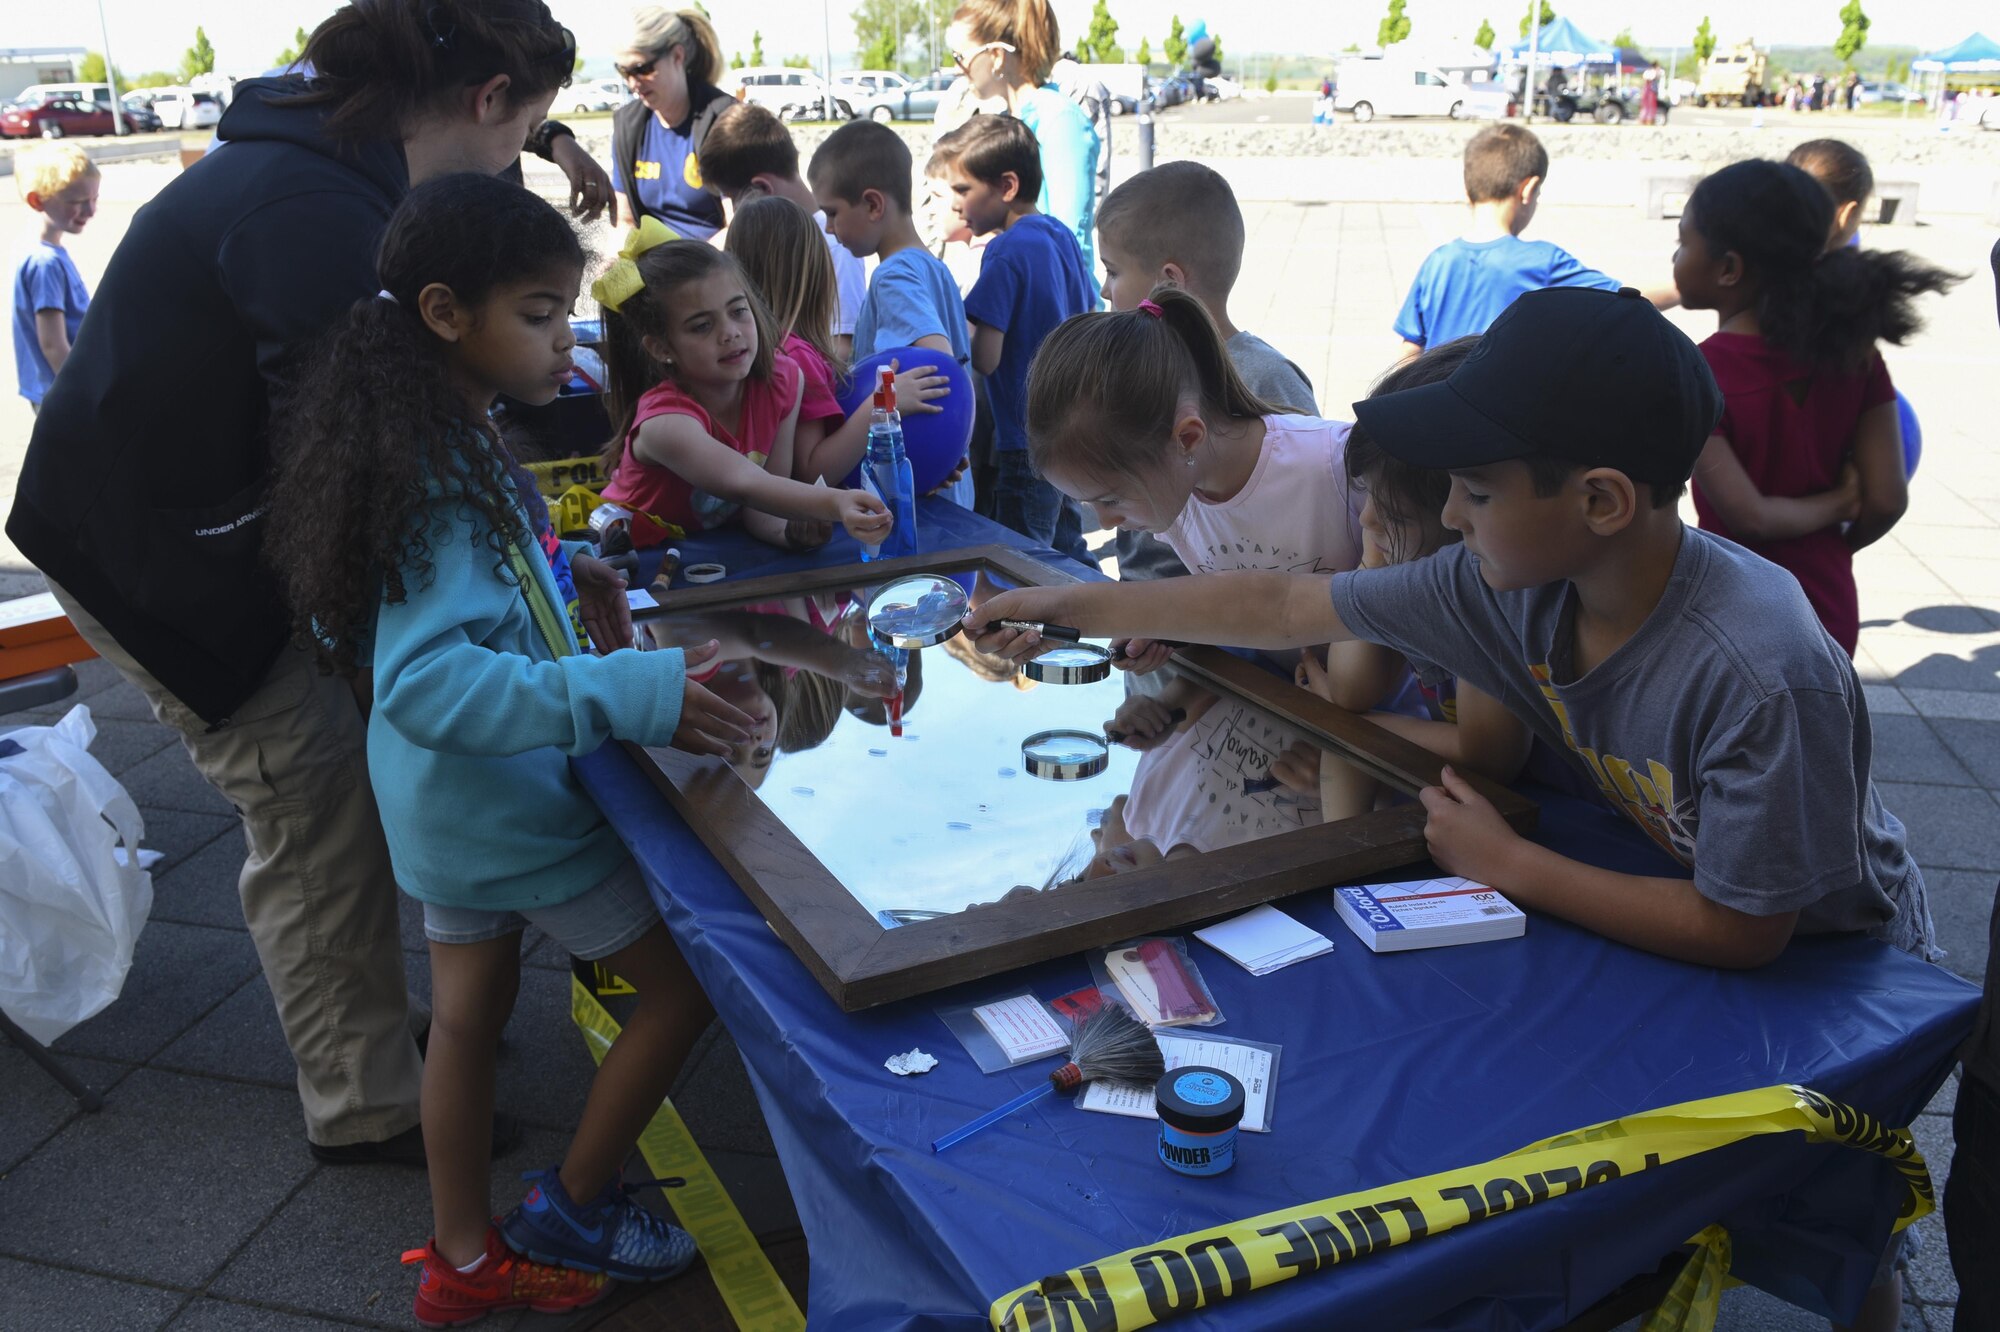 Spangdahlem Elementary School students learn about finger printing during U.S. National Police Week at Spangdahlem Air Base, Germany, May 16, 2017. NPW was established in 1962, by President John F. Kennedy, to honor the bravery and sacrifices of the men and women who serve as police officers. (U.S. Air Force photo by Senior Airman Dawn M. Weber)